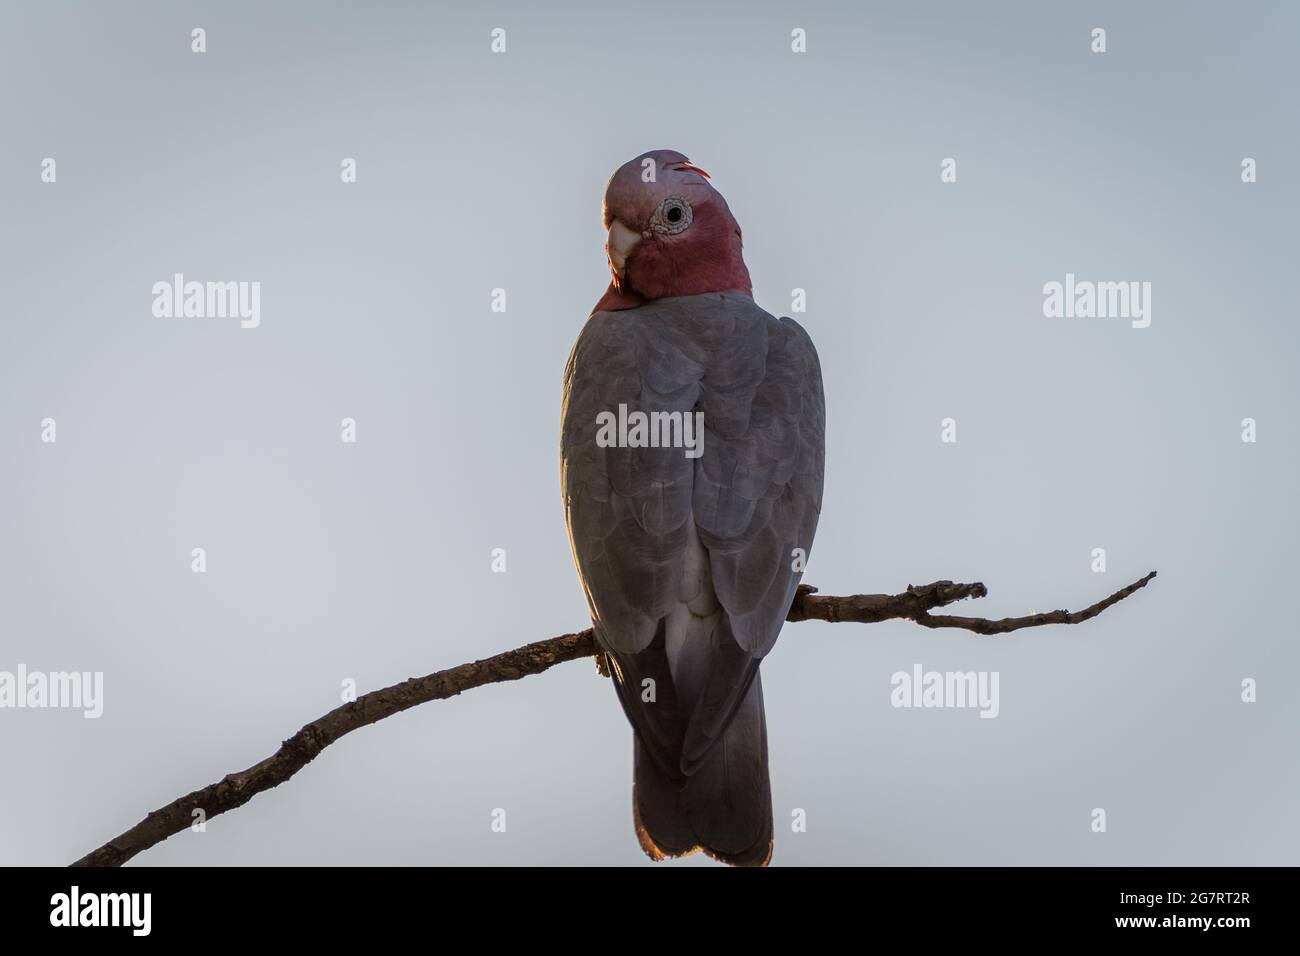 A single rose-breasted cockatoo or Galah perched high on a dead tree branch in outback Western Australia. Stock Photo